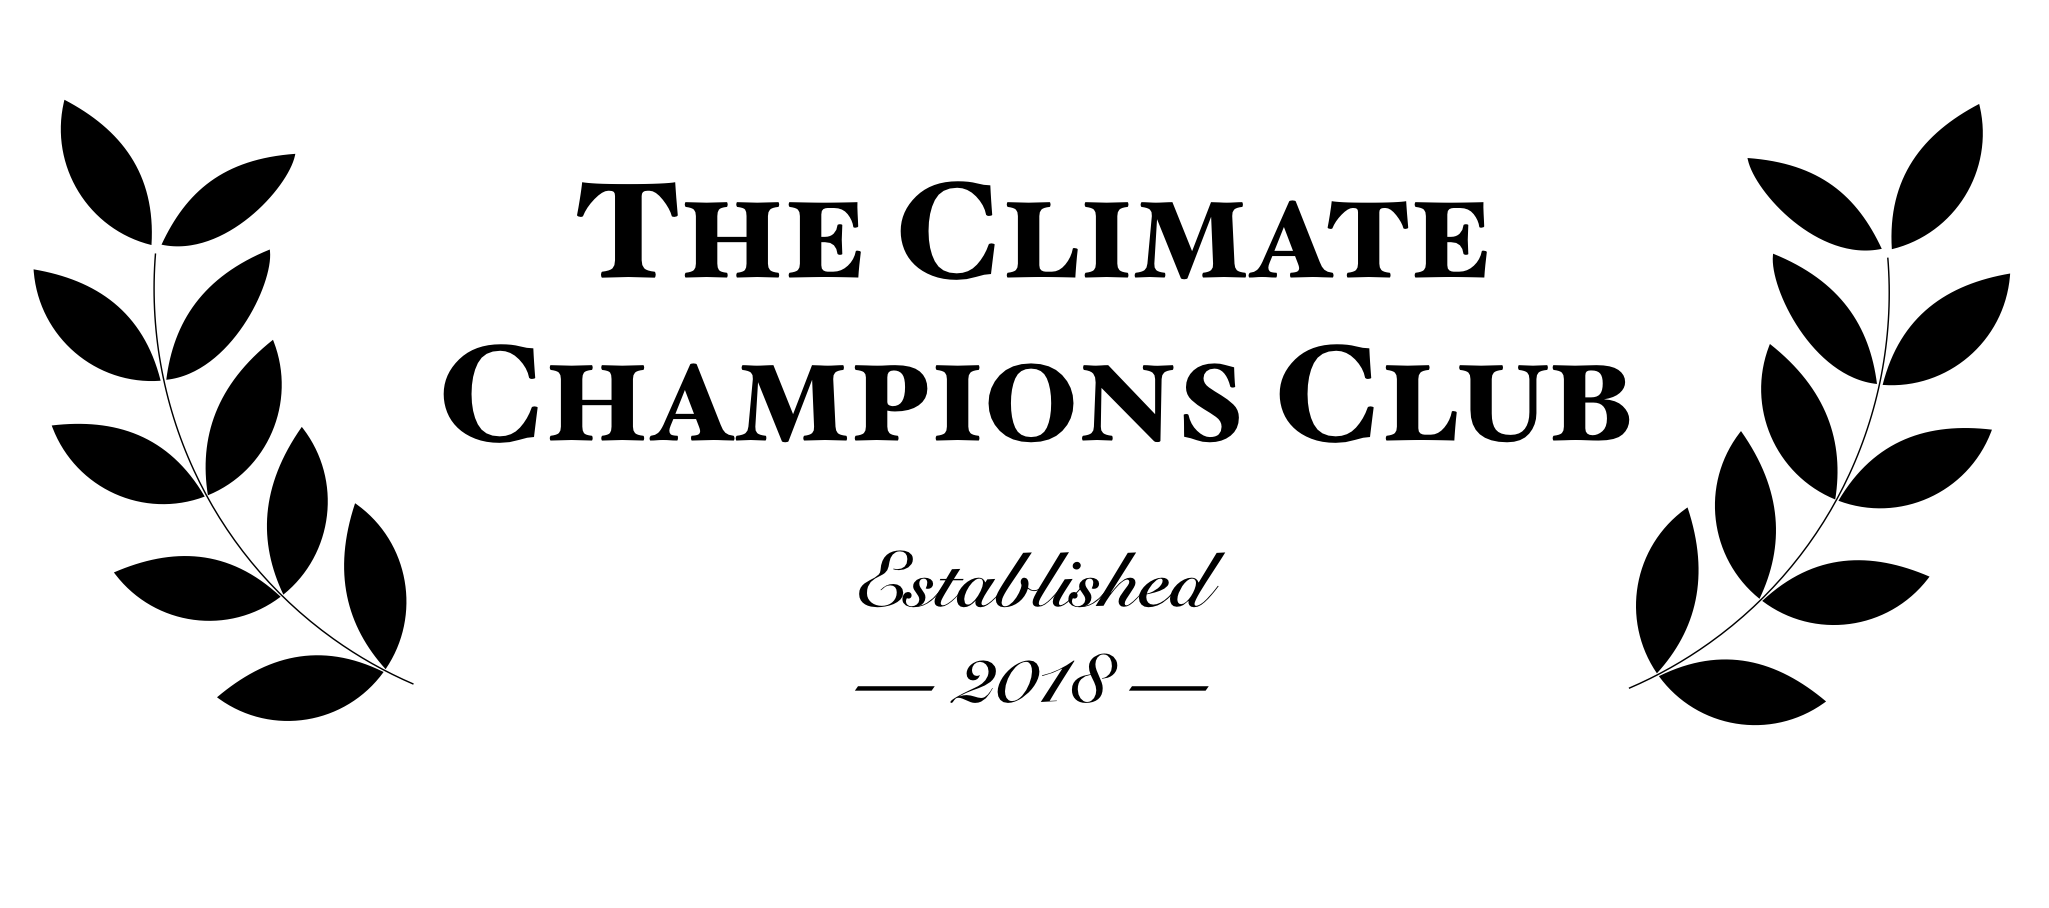 The Climate Champions Club